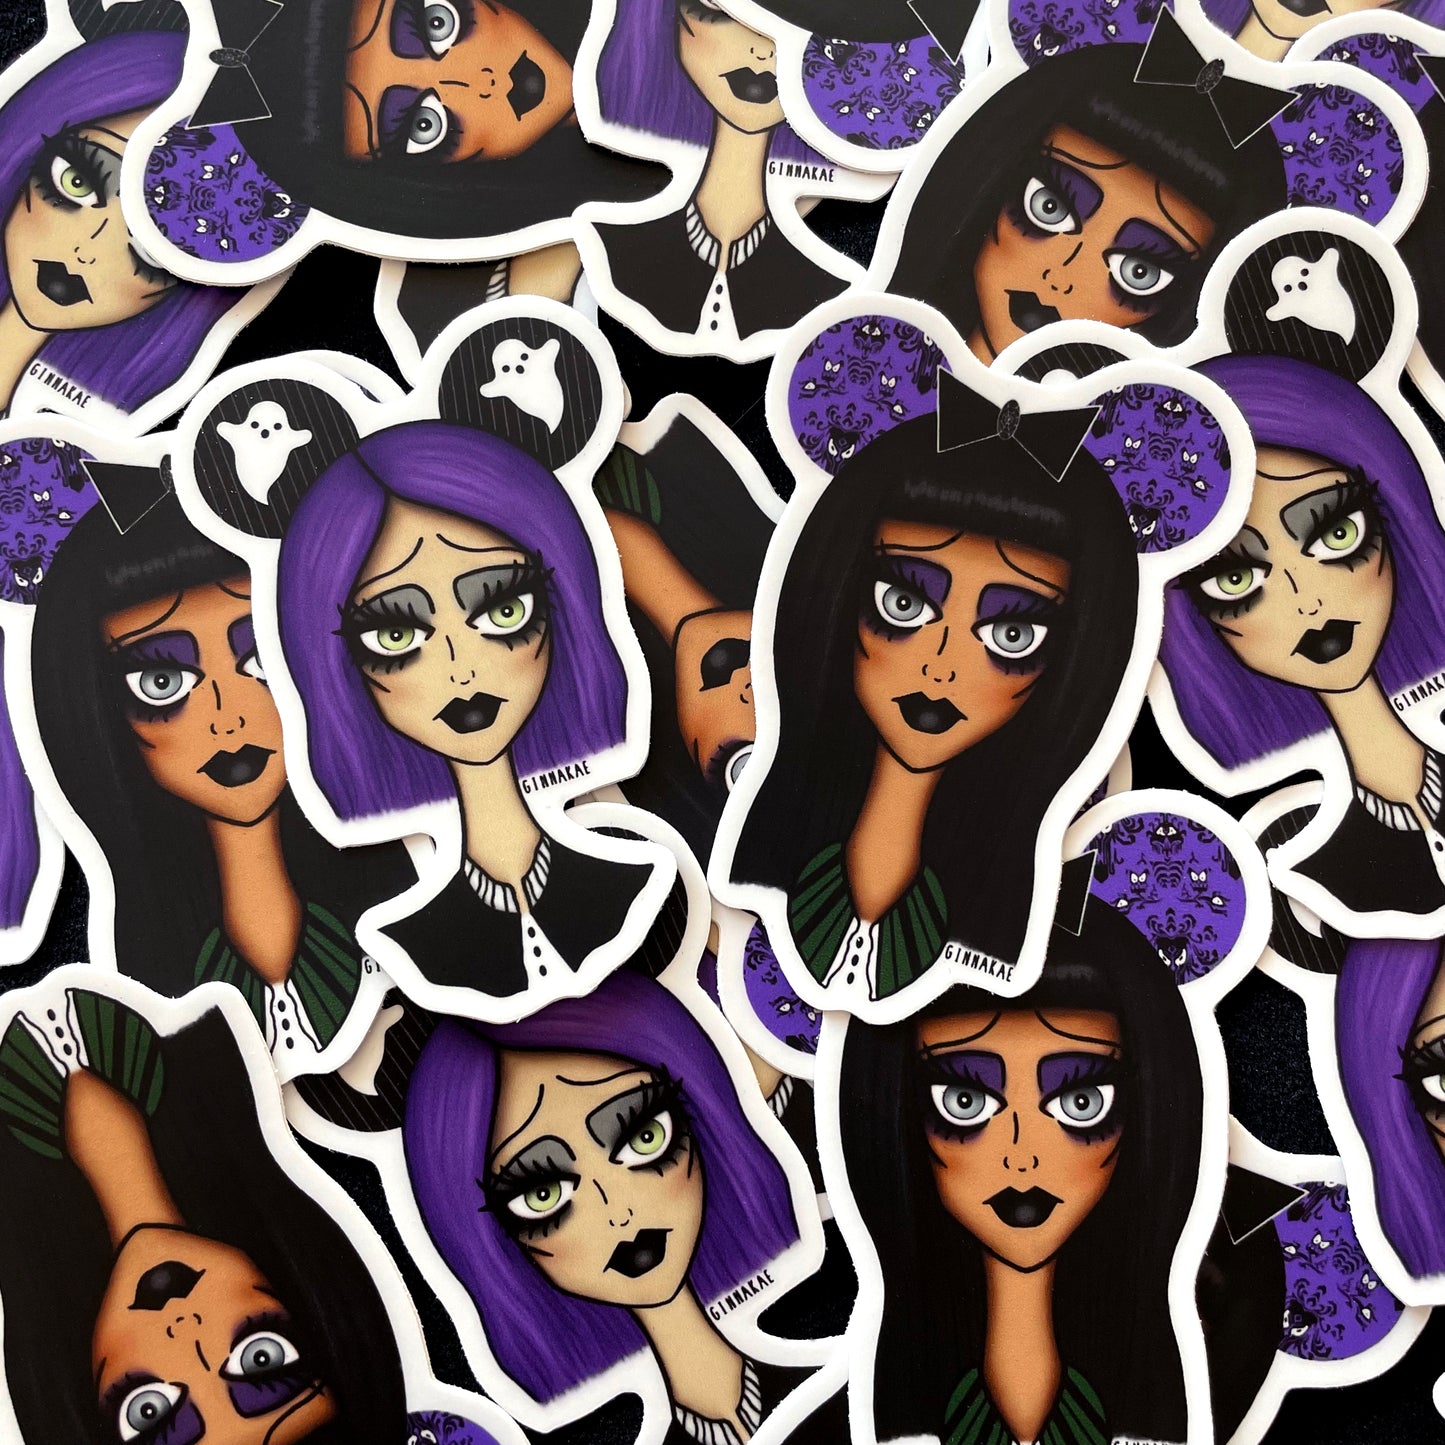 Park Ghouls Stickers